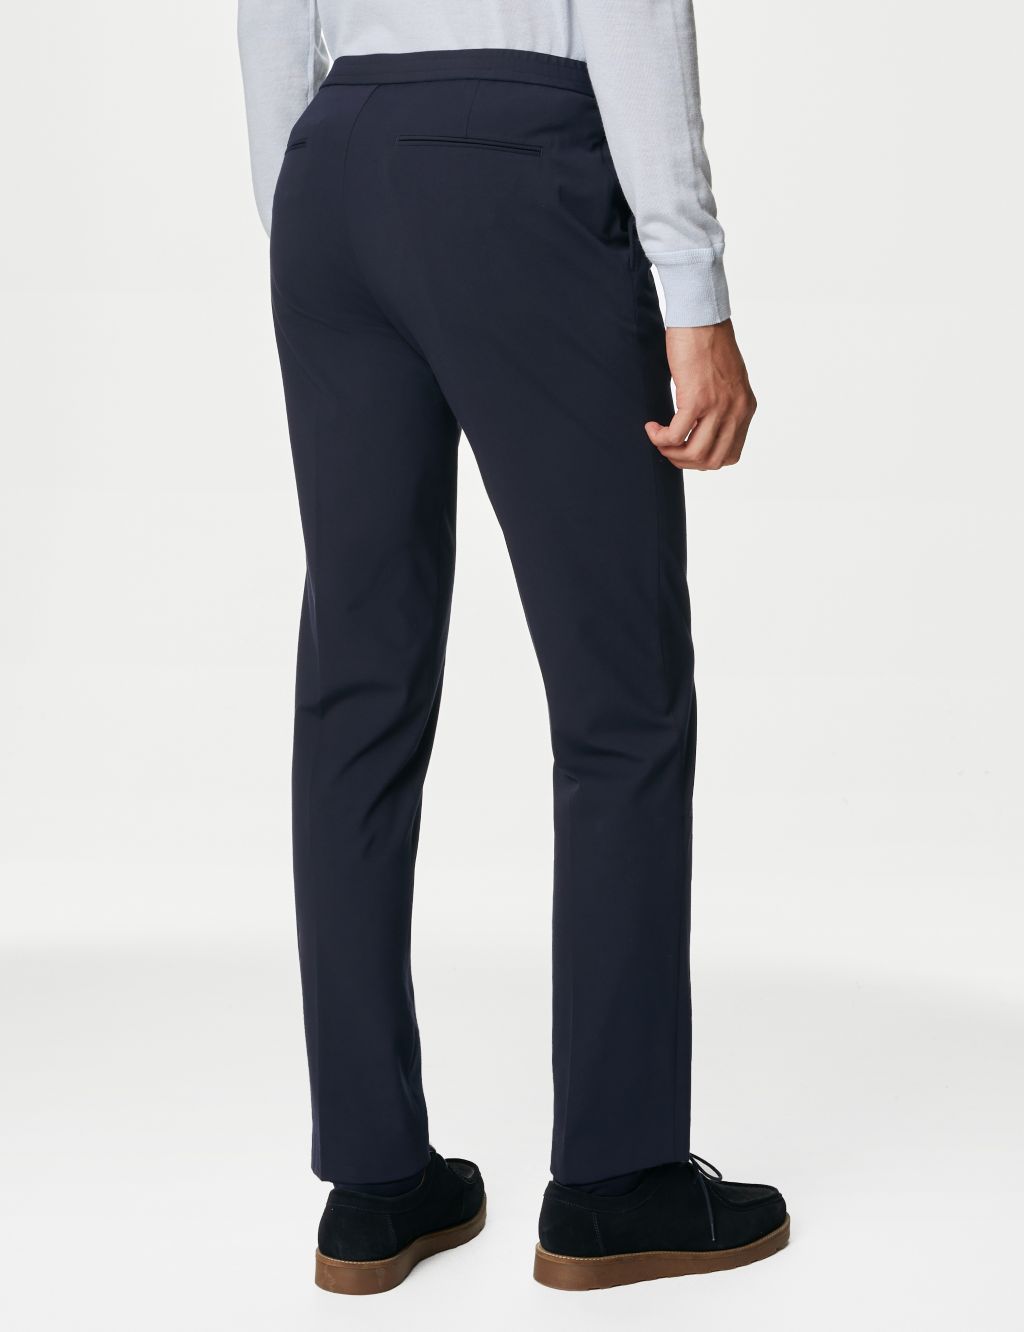 Jersey Flat Front Stretch Trousers image 5